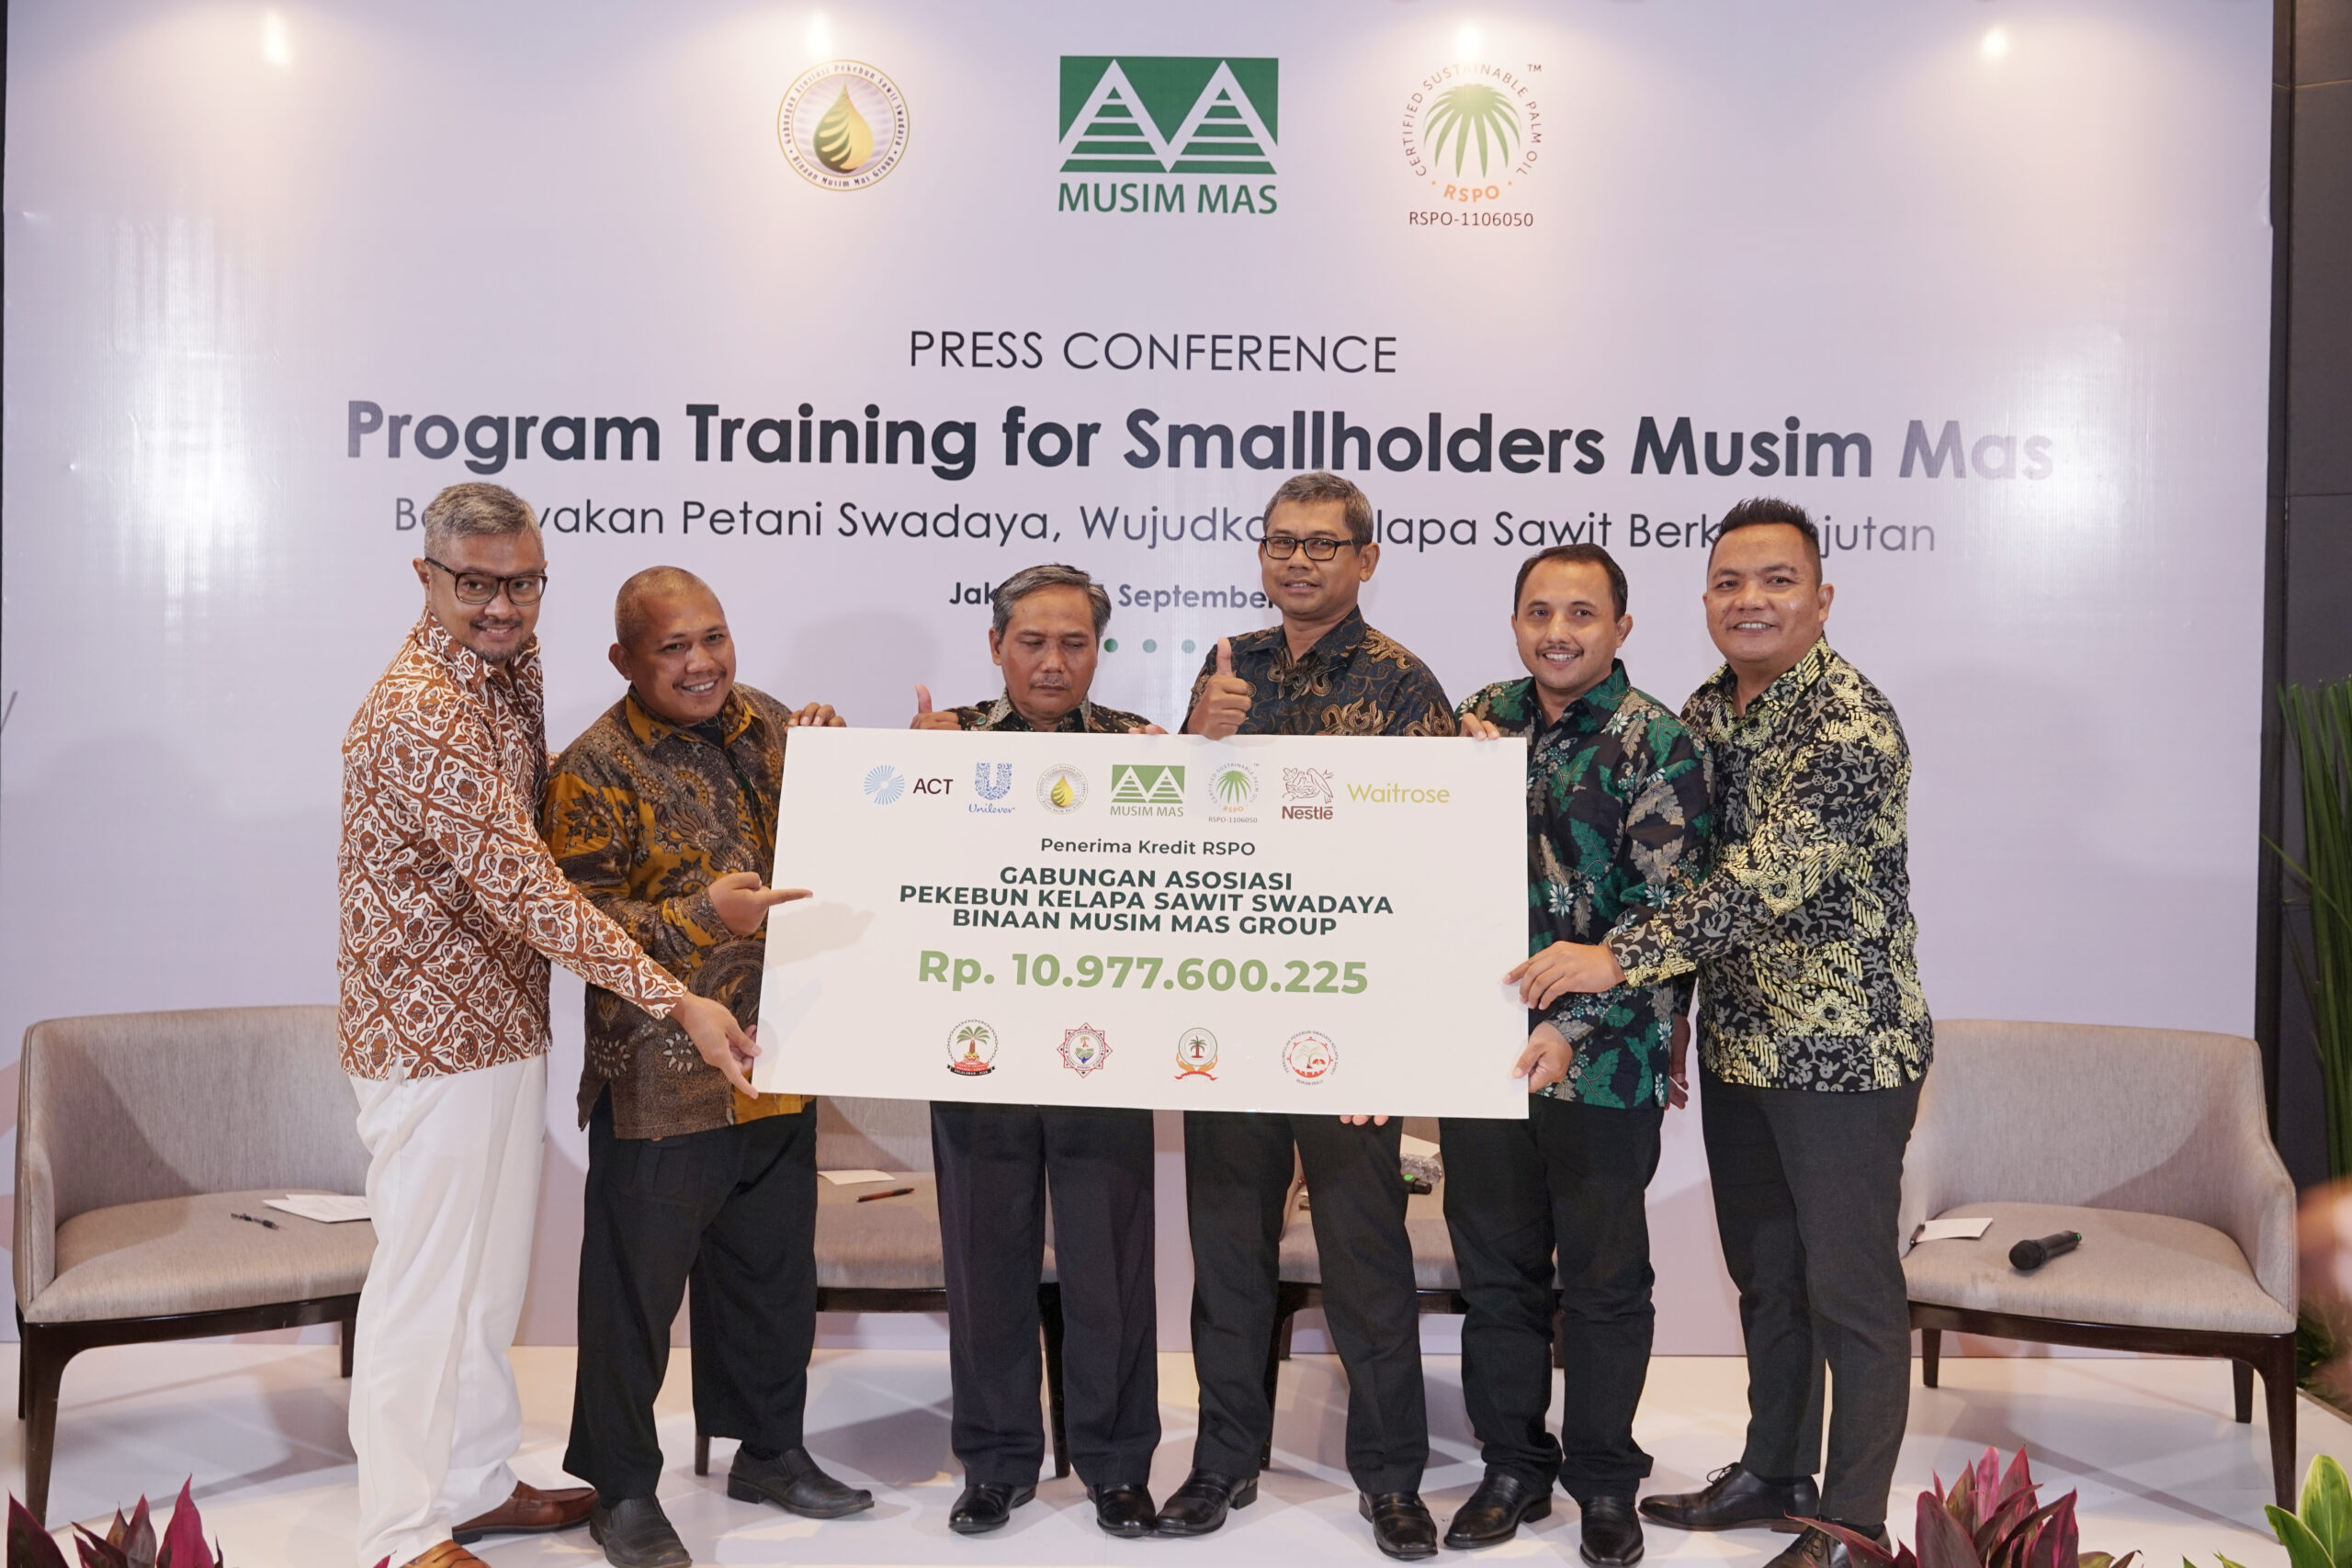 Smallholders from Musim Mas' smallholder program attended a press conference organised by Musim Mas as received USD 733k for the sale of RSPO credits to international buyers